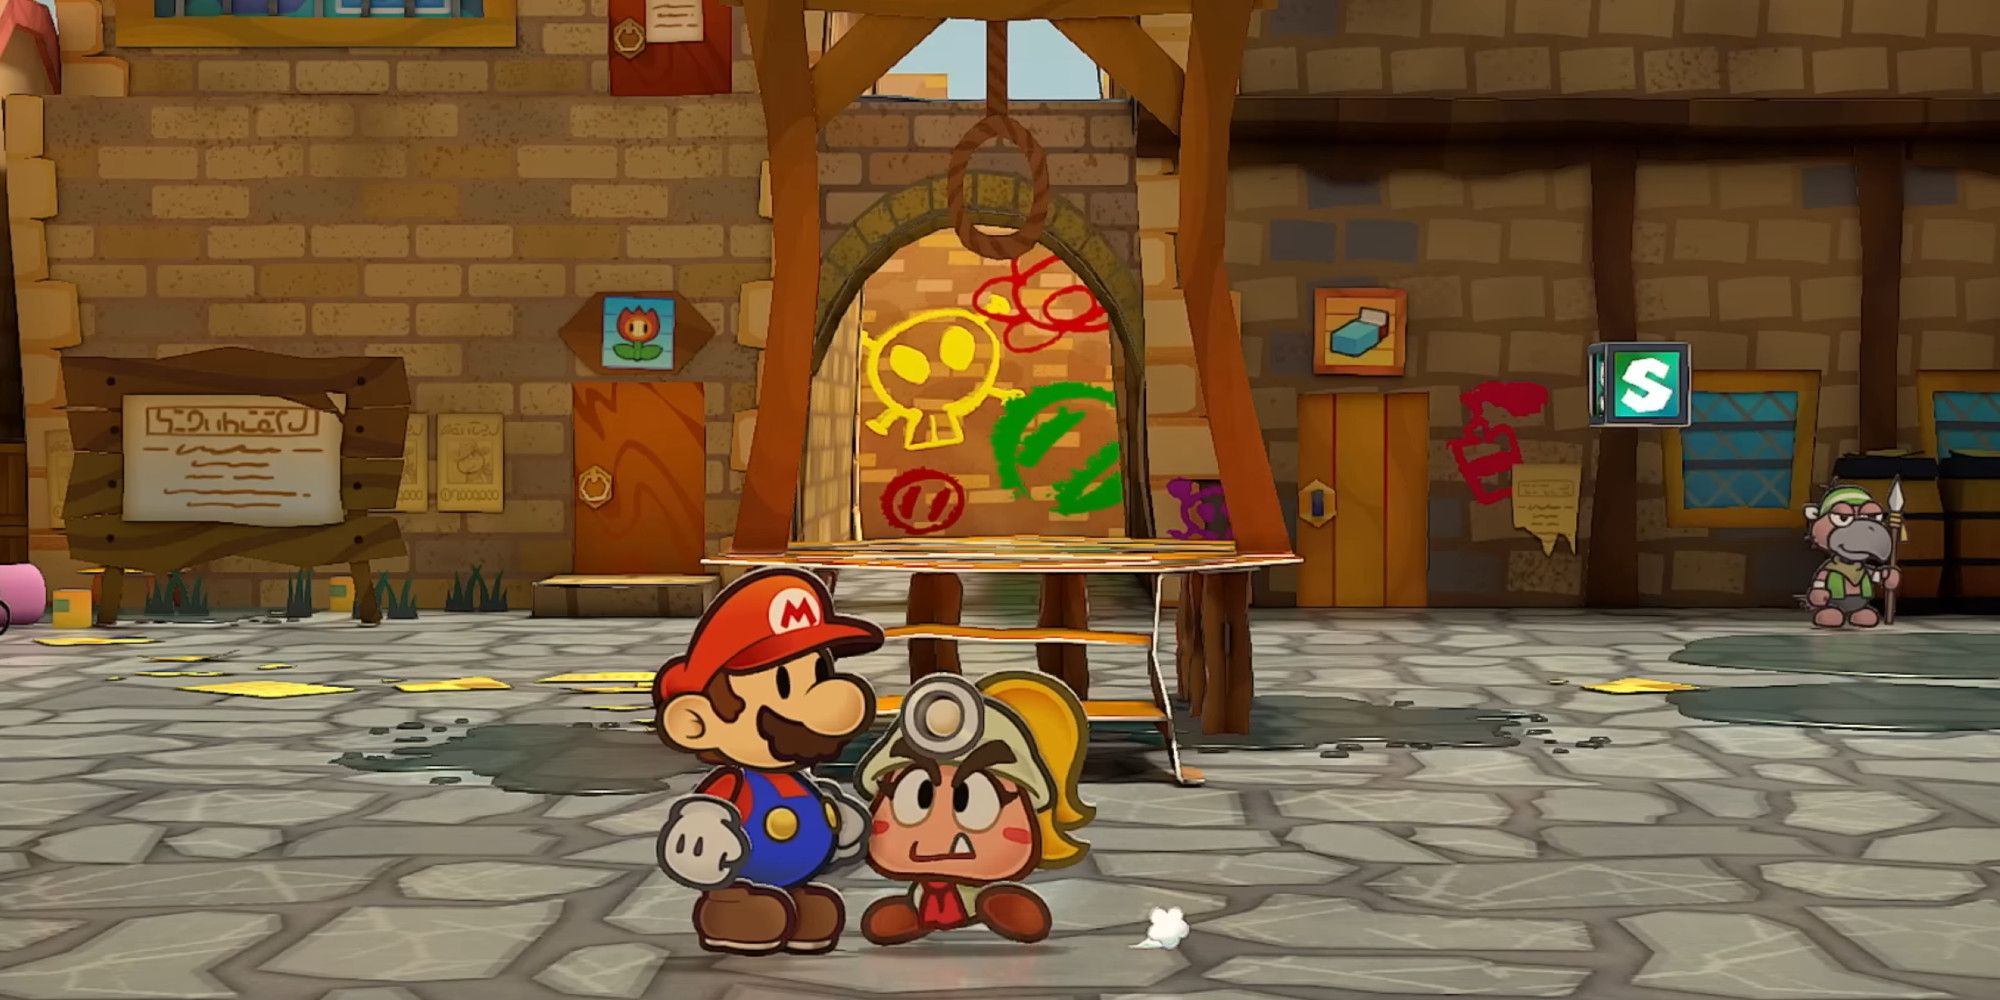 Paper Mario and a Goomba next to a noose in The Thousand Year Door